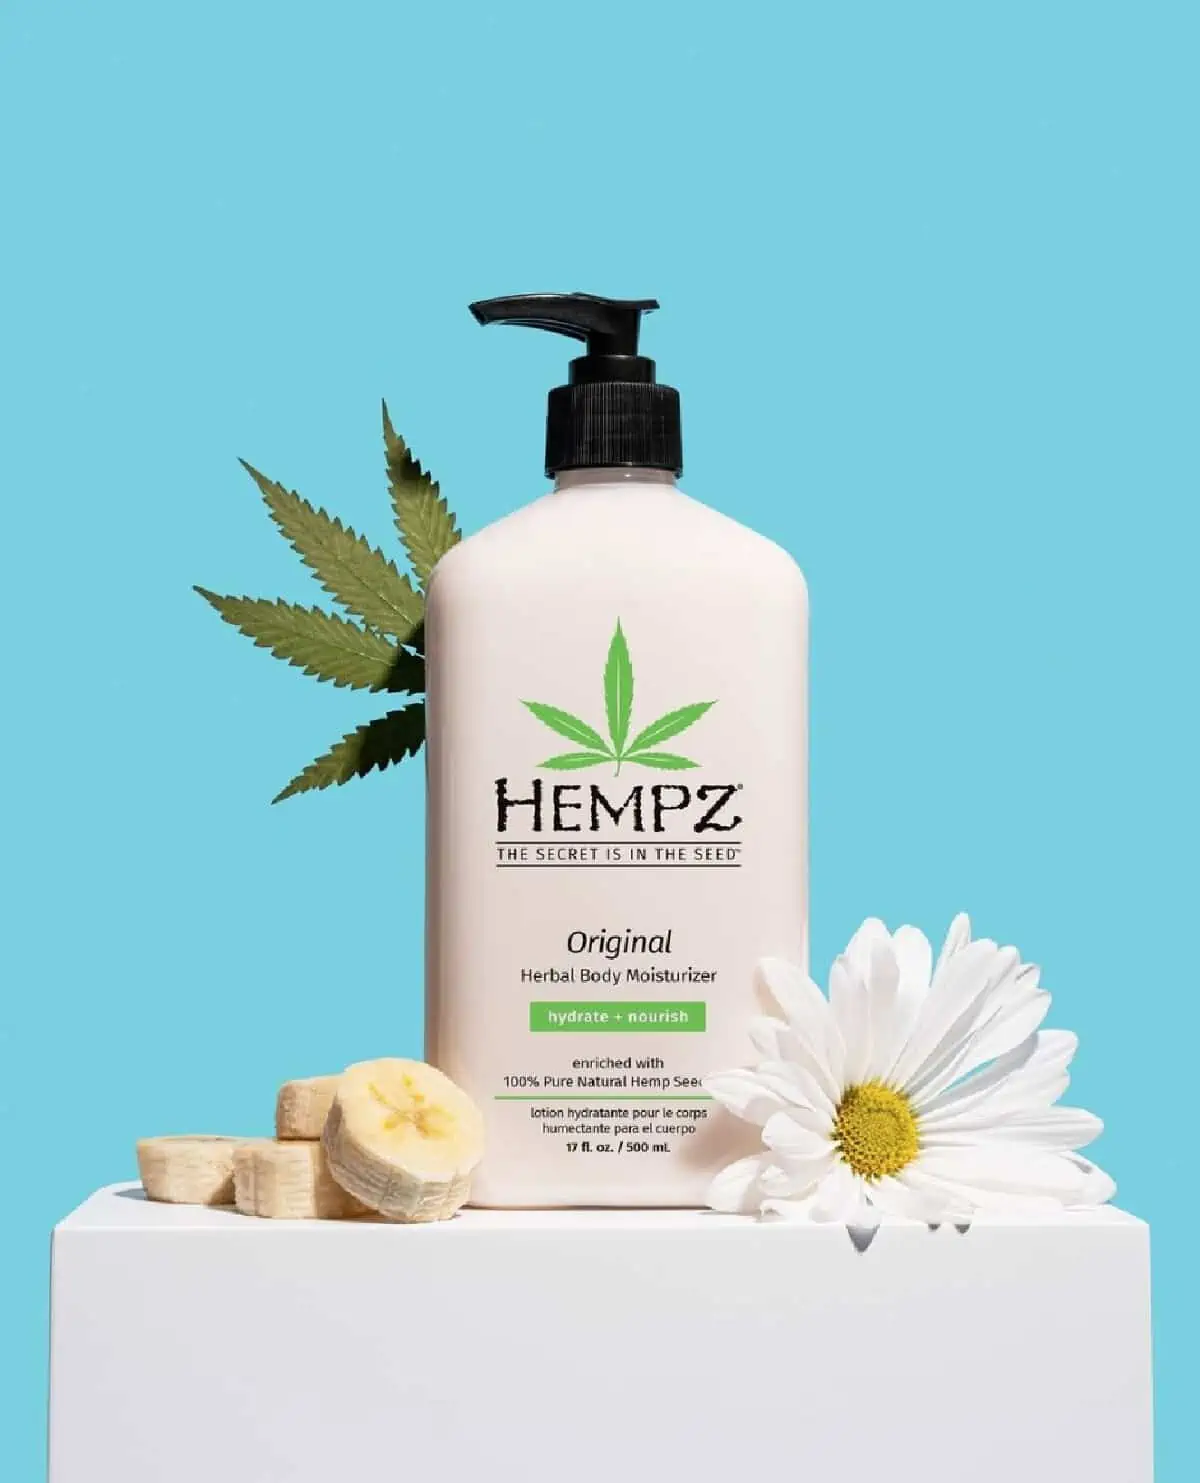 A white bottle of Hempz body lotion with a black pump top on top a white box decorated with bananas, daisies, and a hemp leaf on a blue background. 